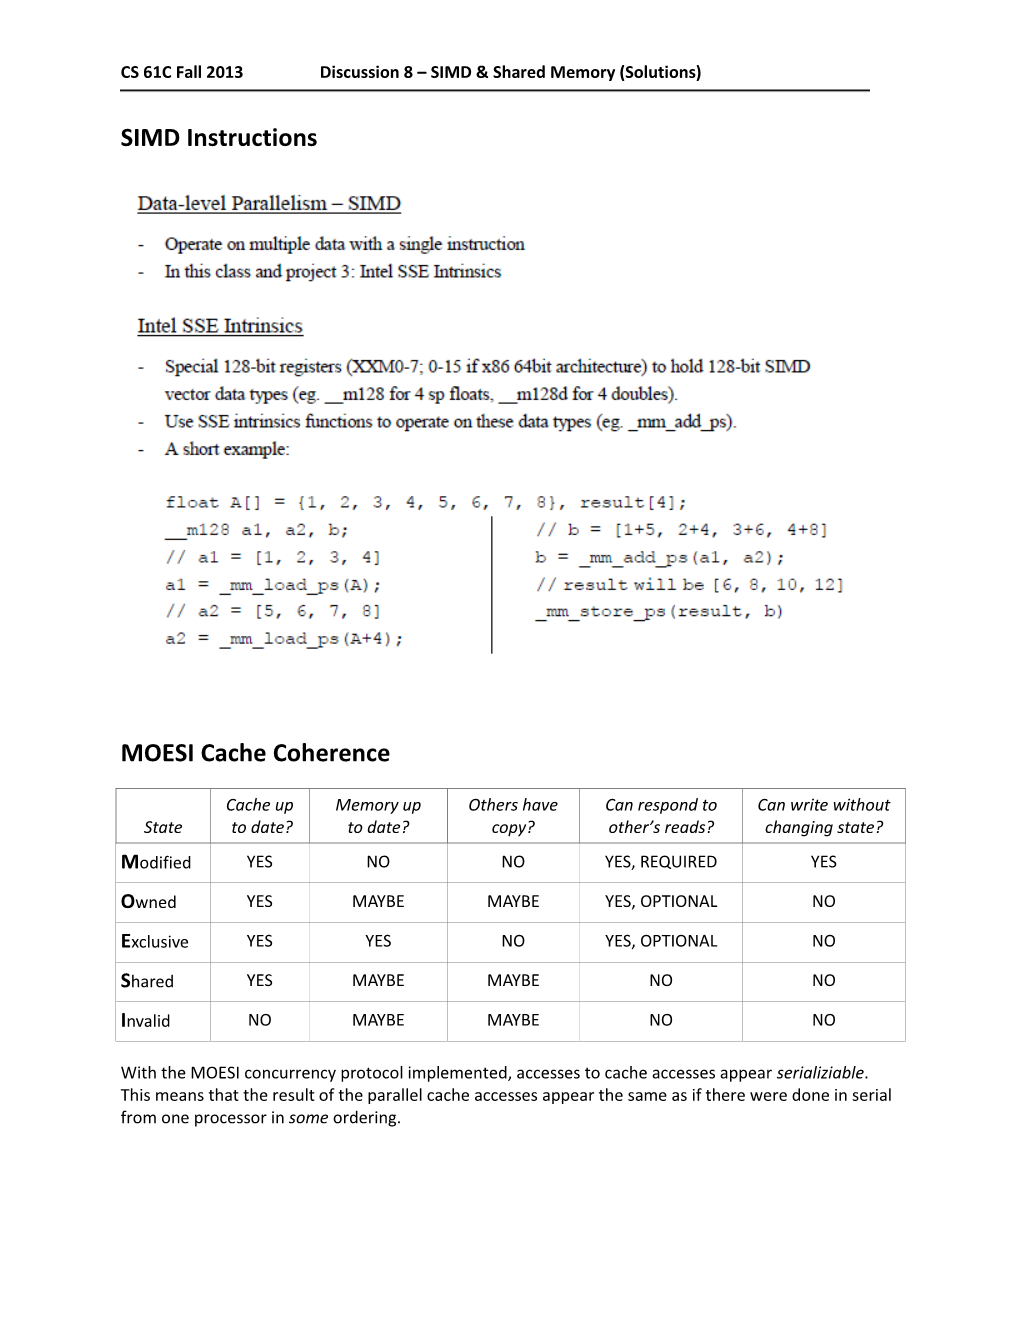 SIMD Instructions MOESI Cache Coherence